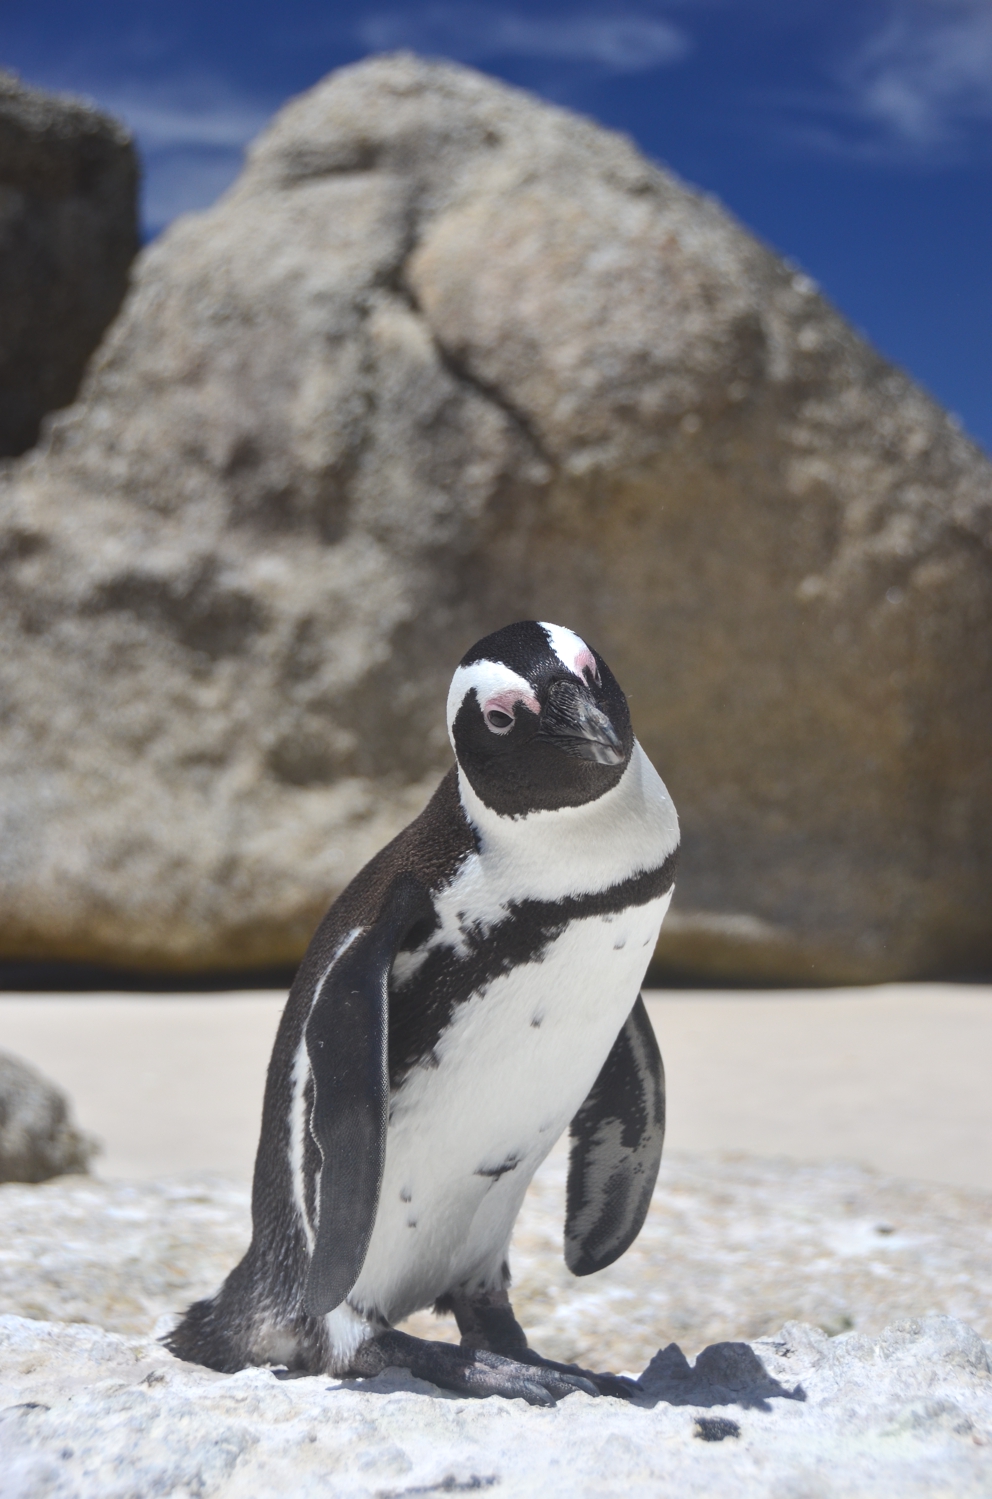 Boulders Beach, located in Simon's Town, is a popular stop en-route to Cape Point